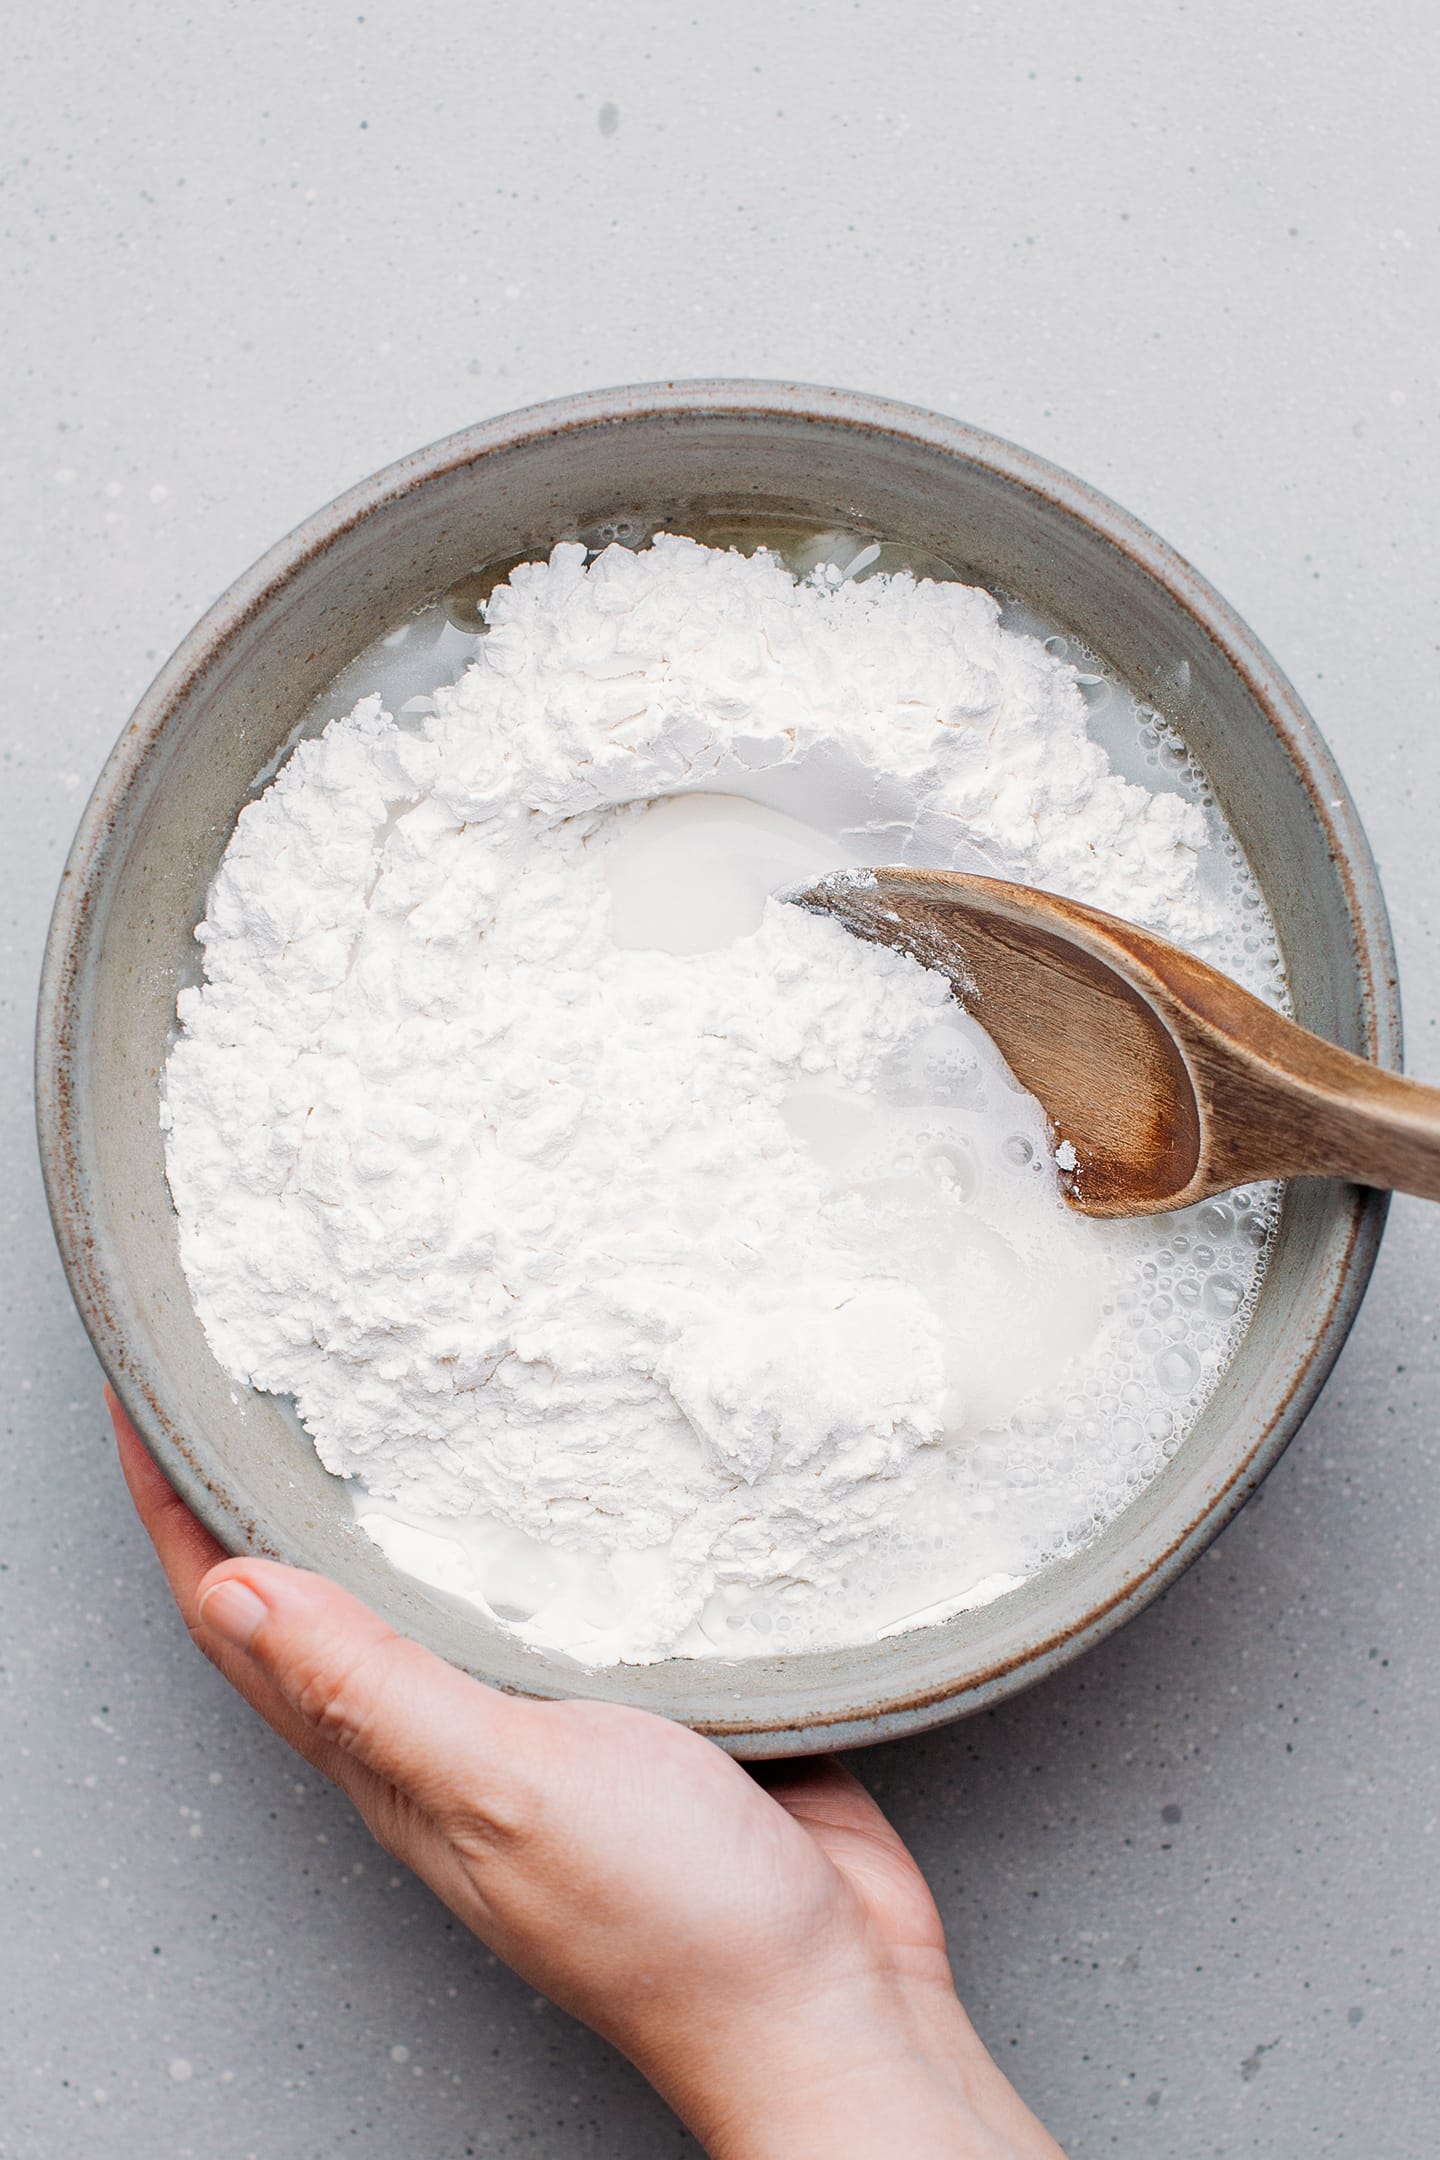 Whisking rice flour with sugar and water in a bowl.